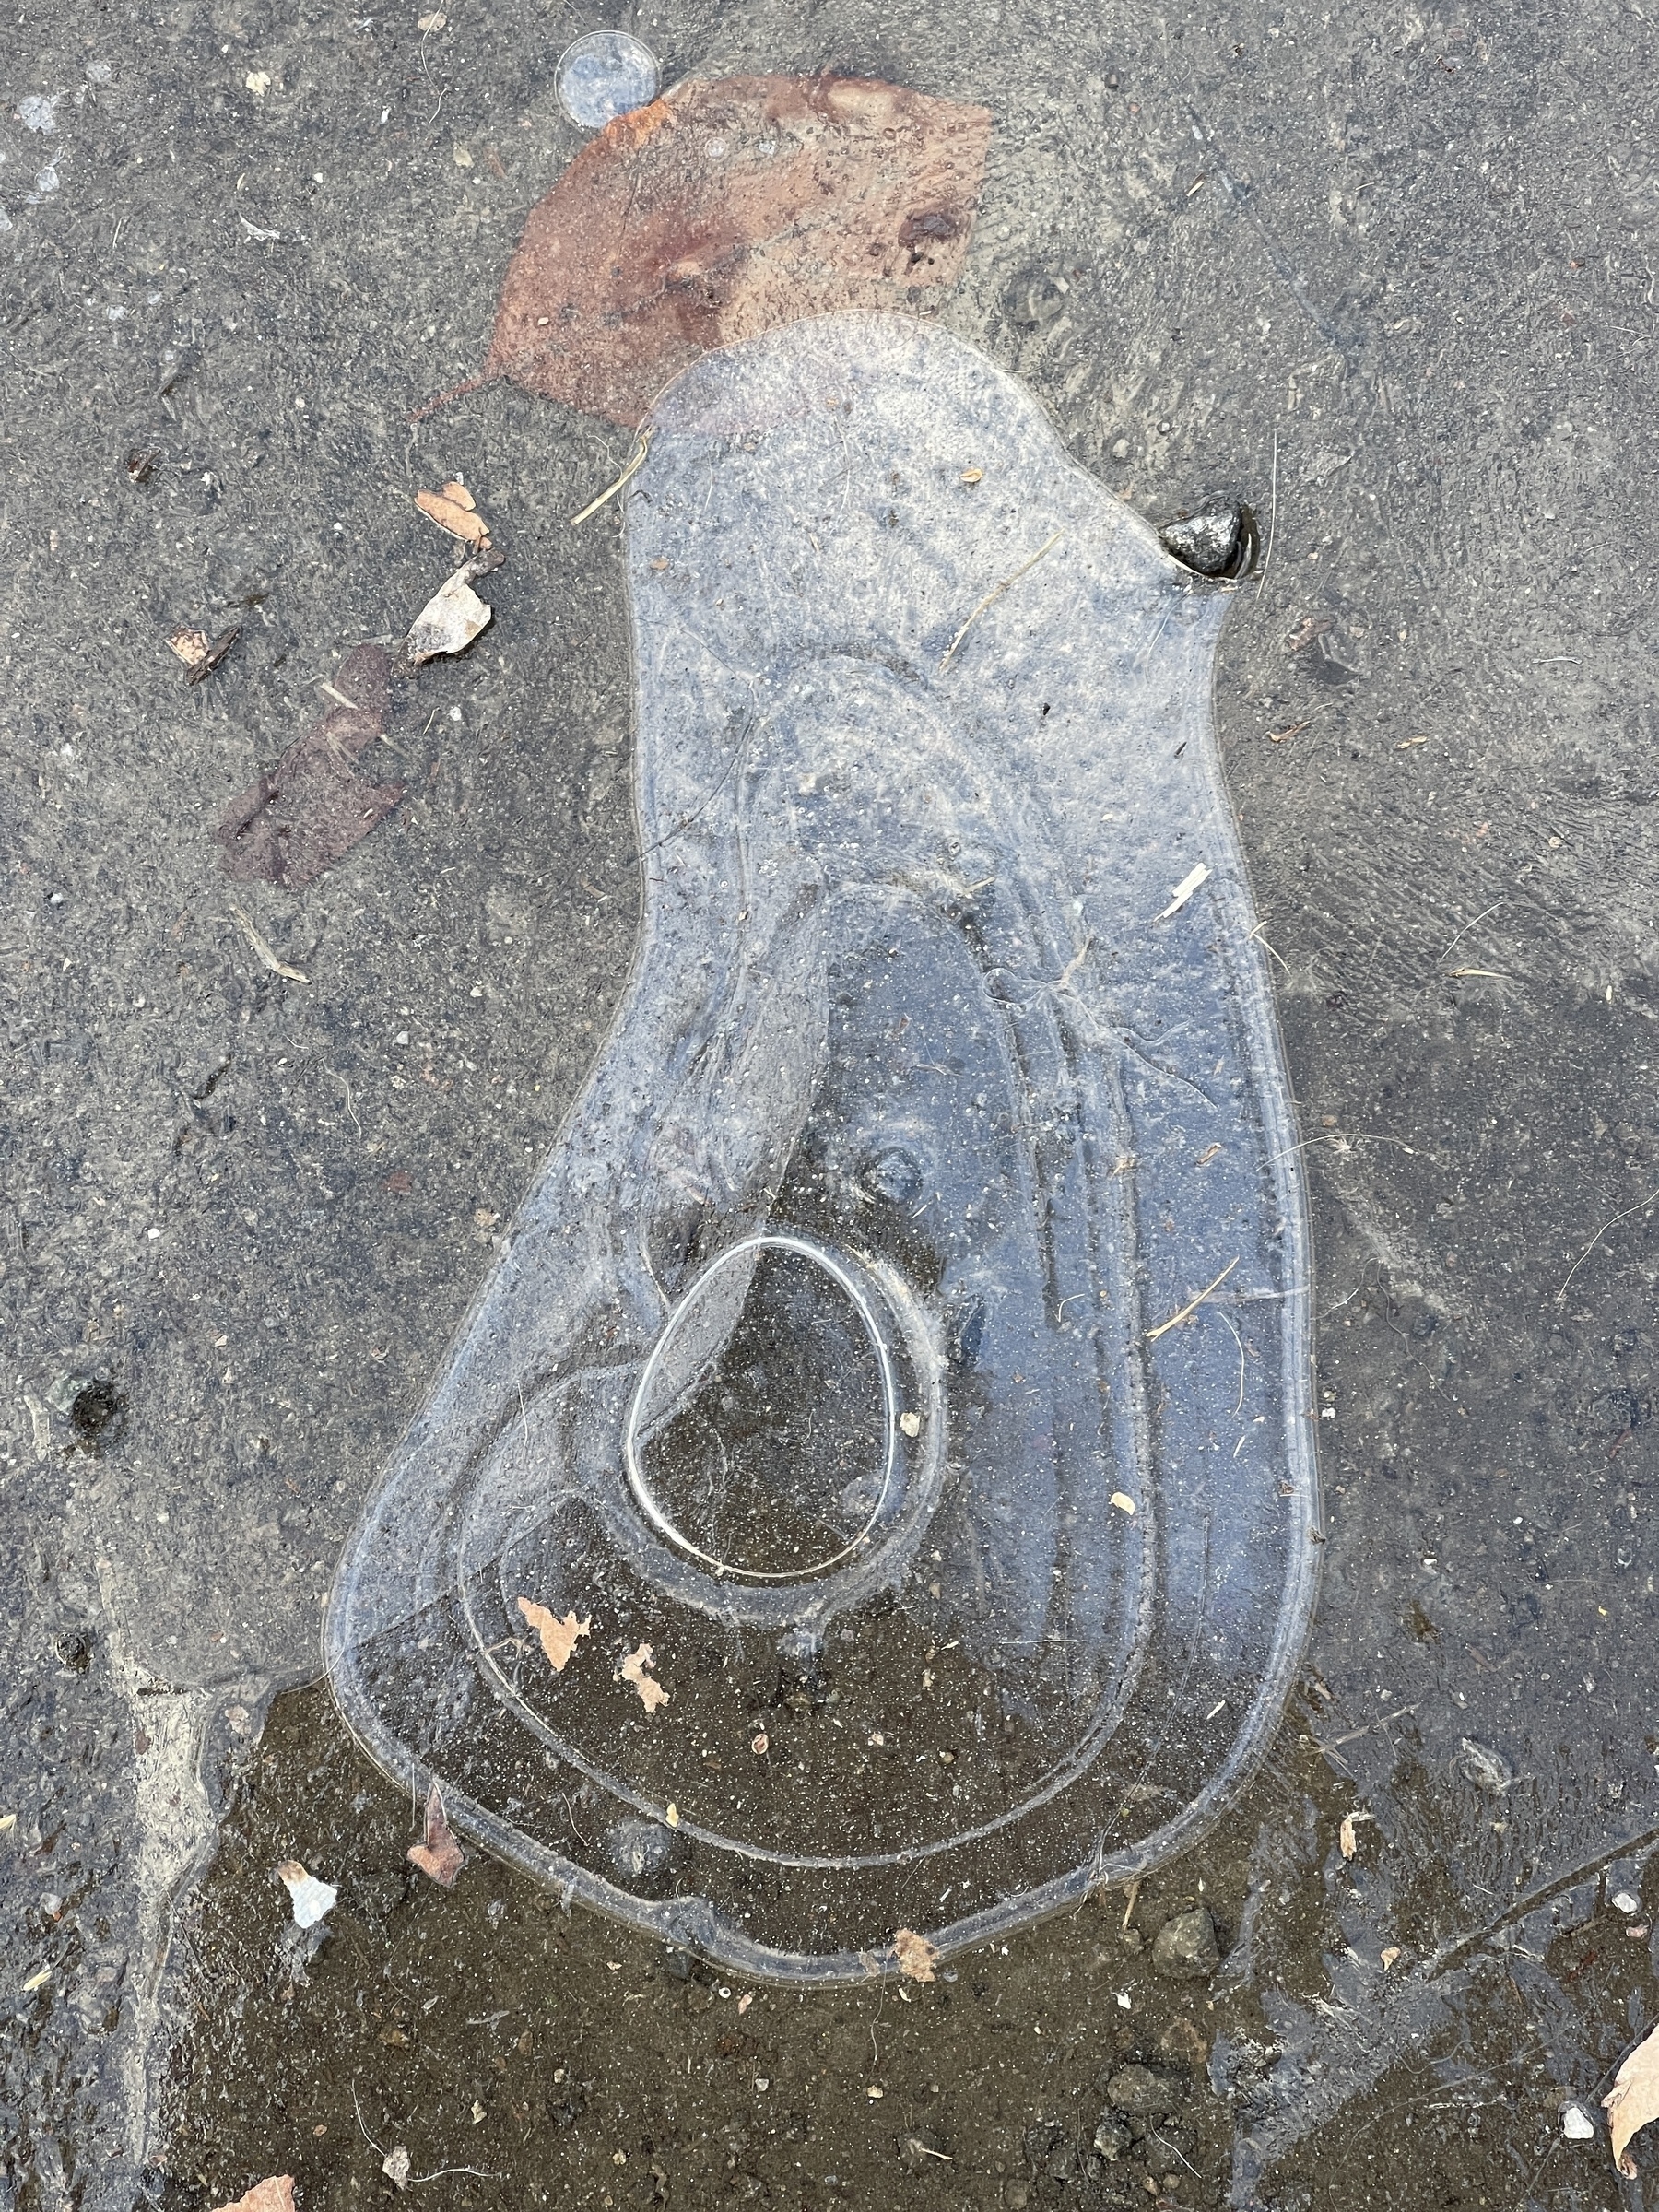 Ice pattern in a puddle.